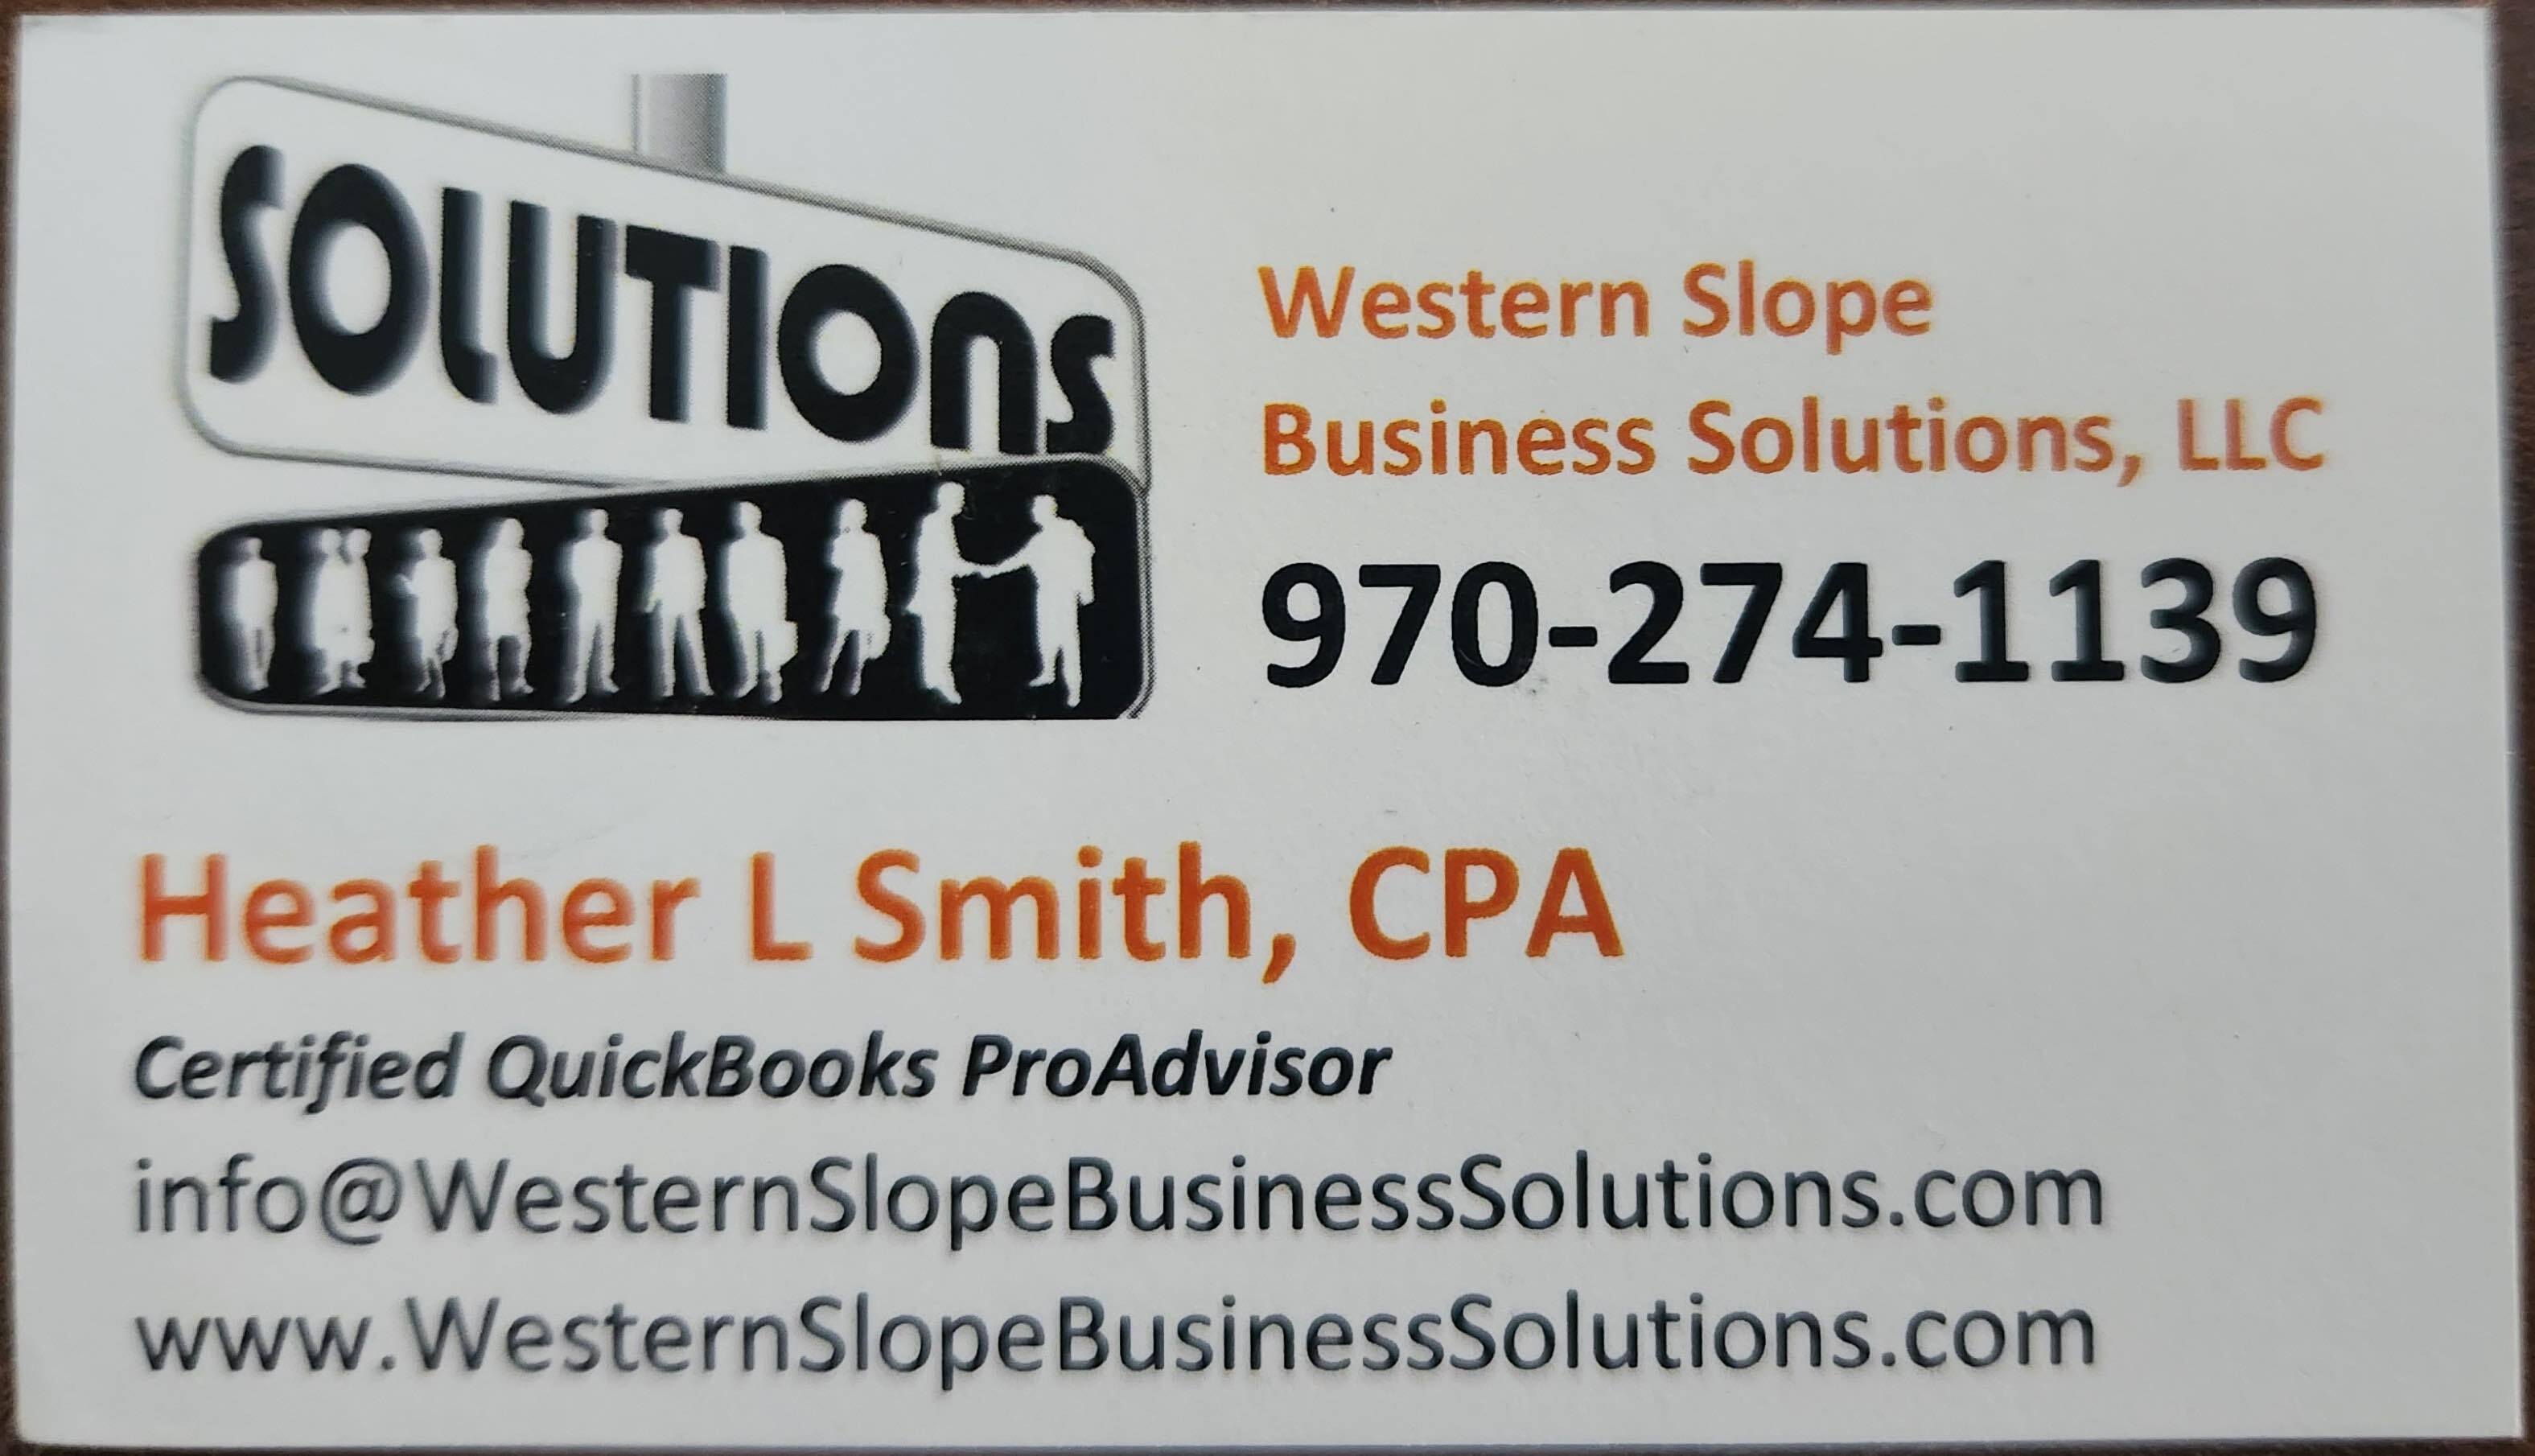 Western Slope Business Solutions